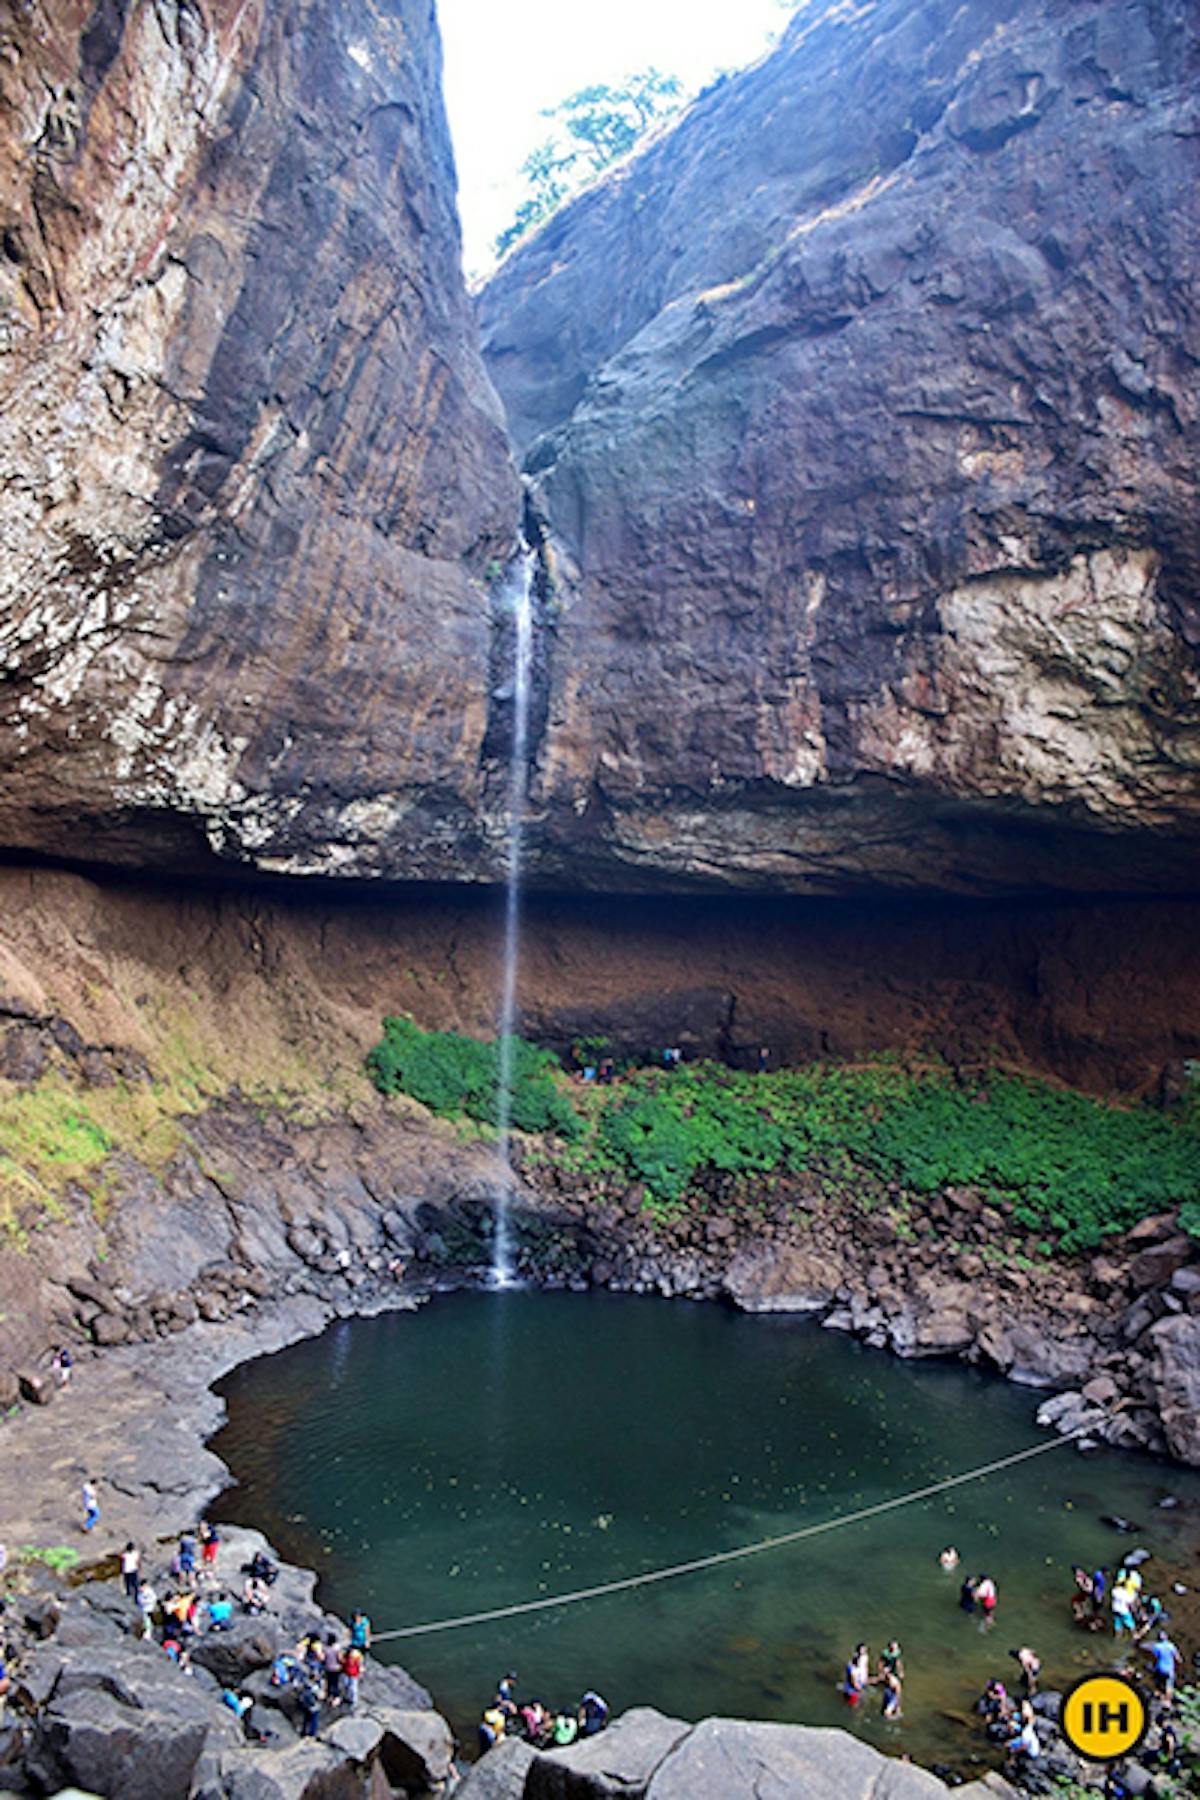 A rope marks out the safe section from the unsafe section in the pool formed by the waterfall PC: Apoorva Karlekar